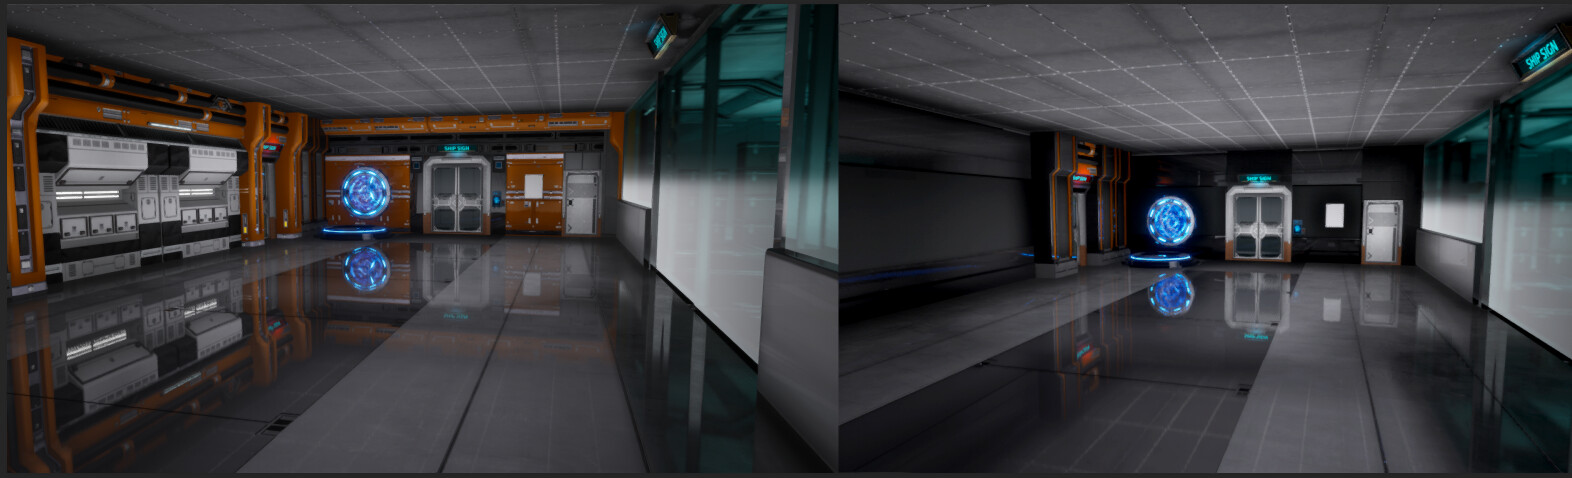 Inside of the main spaceship, before &amp; after adjustments to materials and lighting